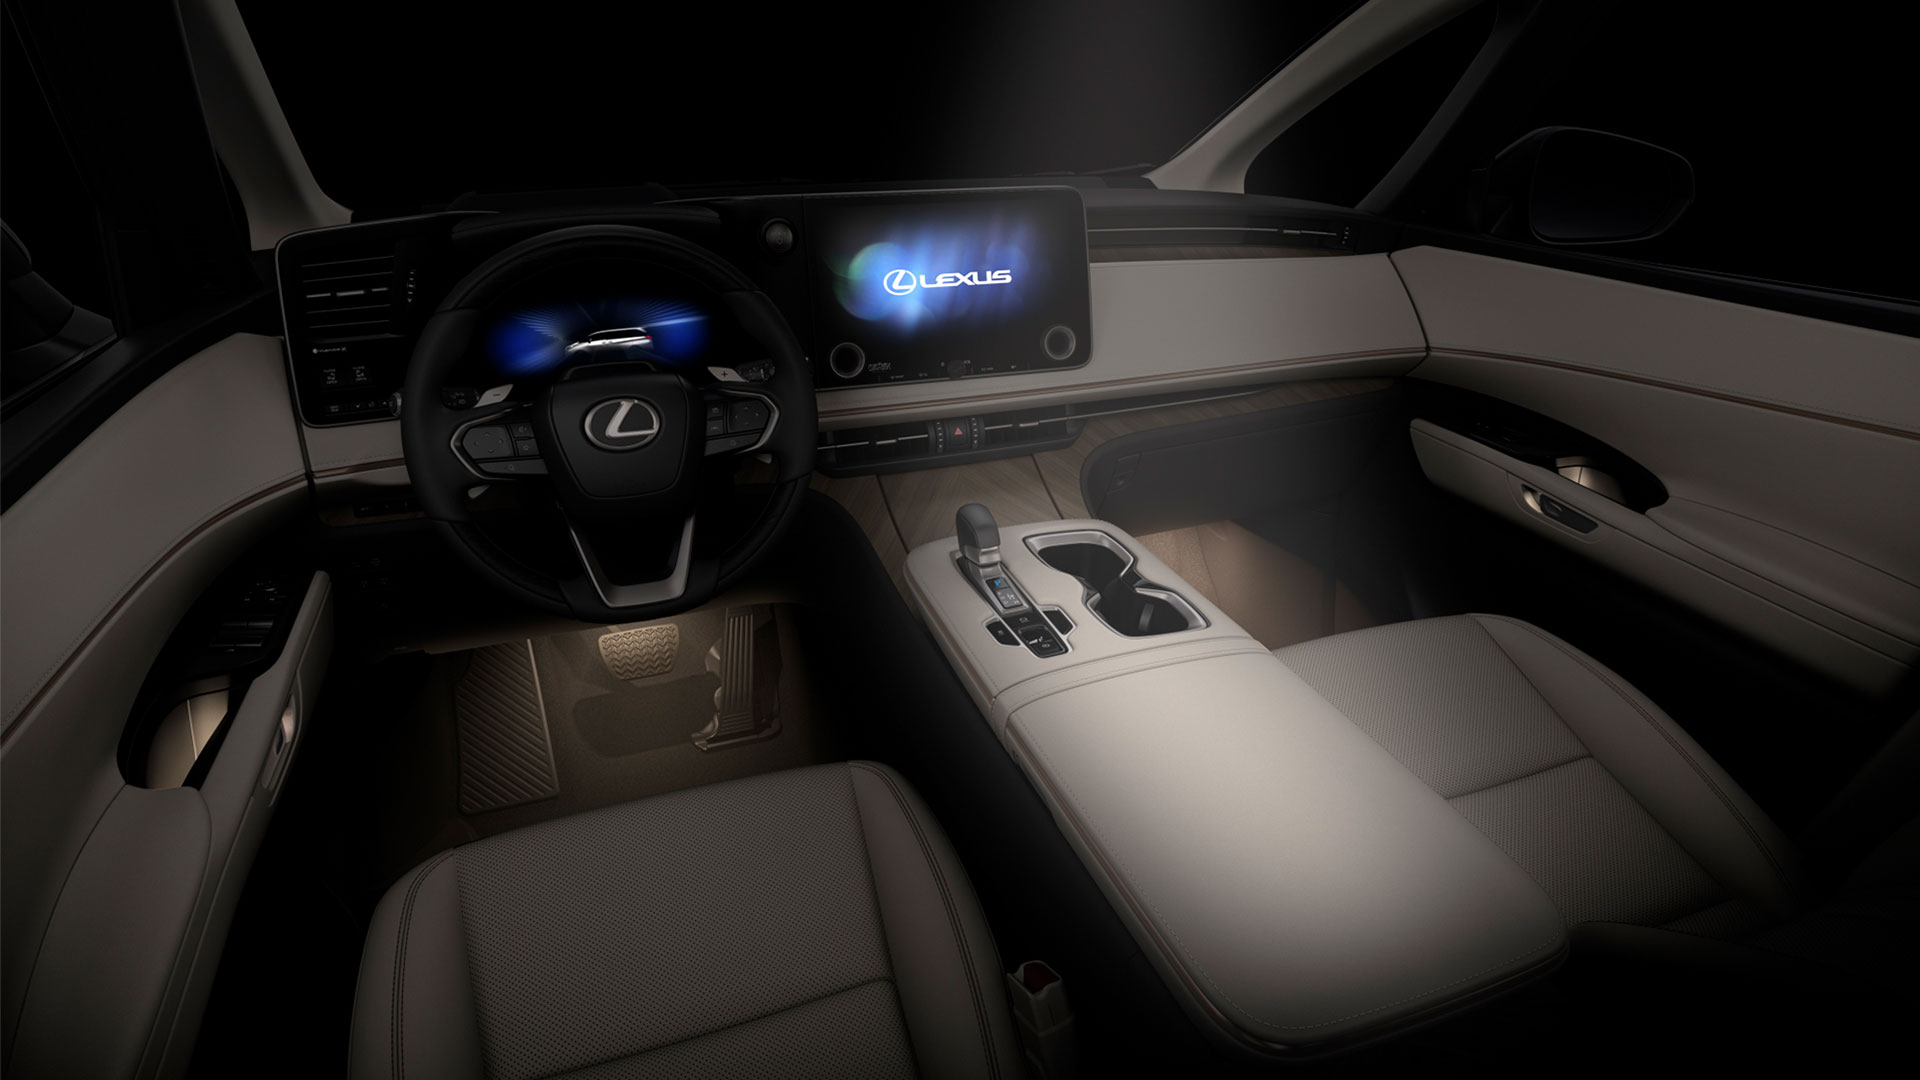 Interior illumination in the front seats of the LM 500h